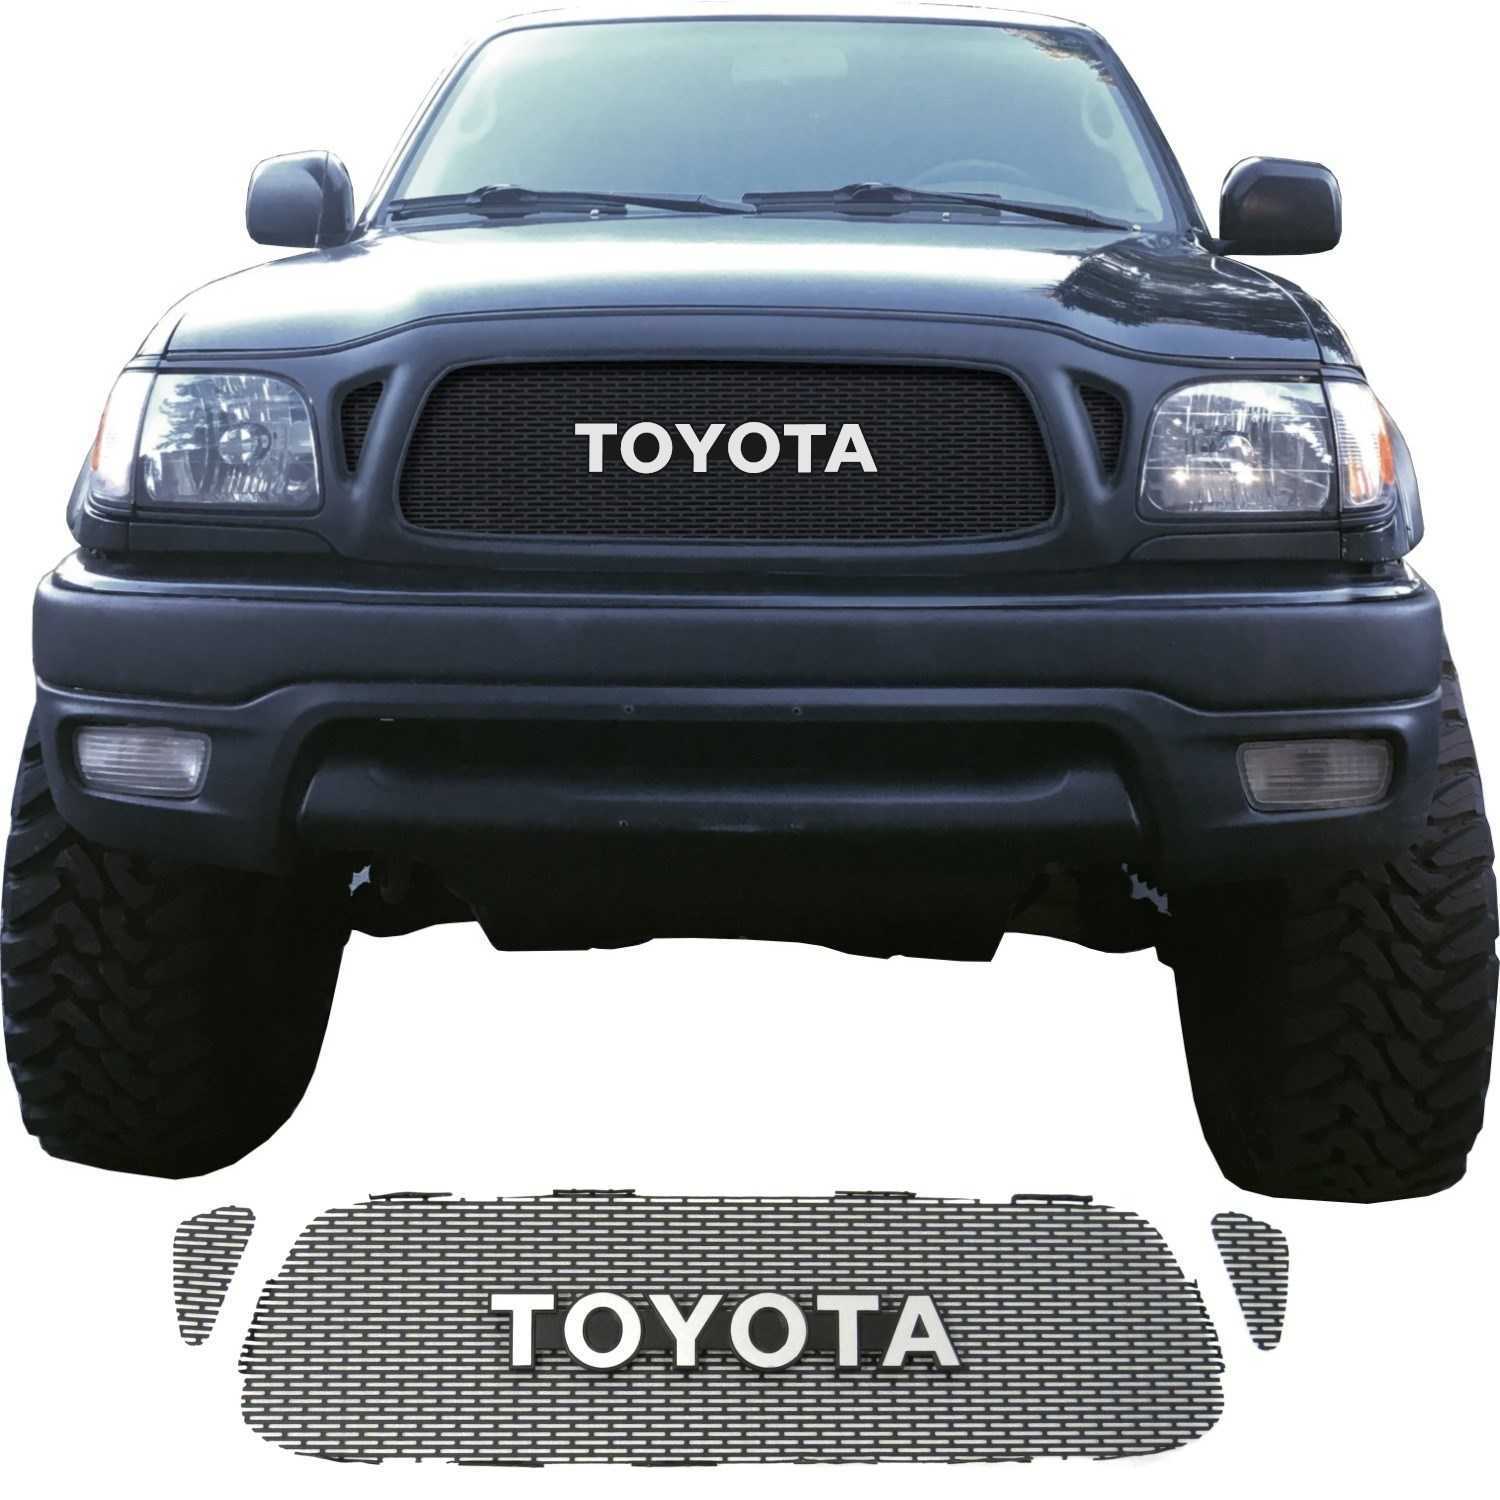 2001 - 2004 Toyota Tacoma Grill Mesh With Toyota Emblem